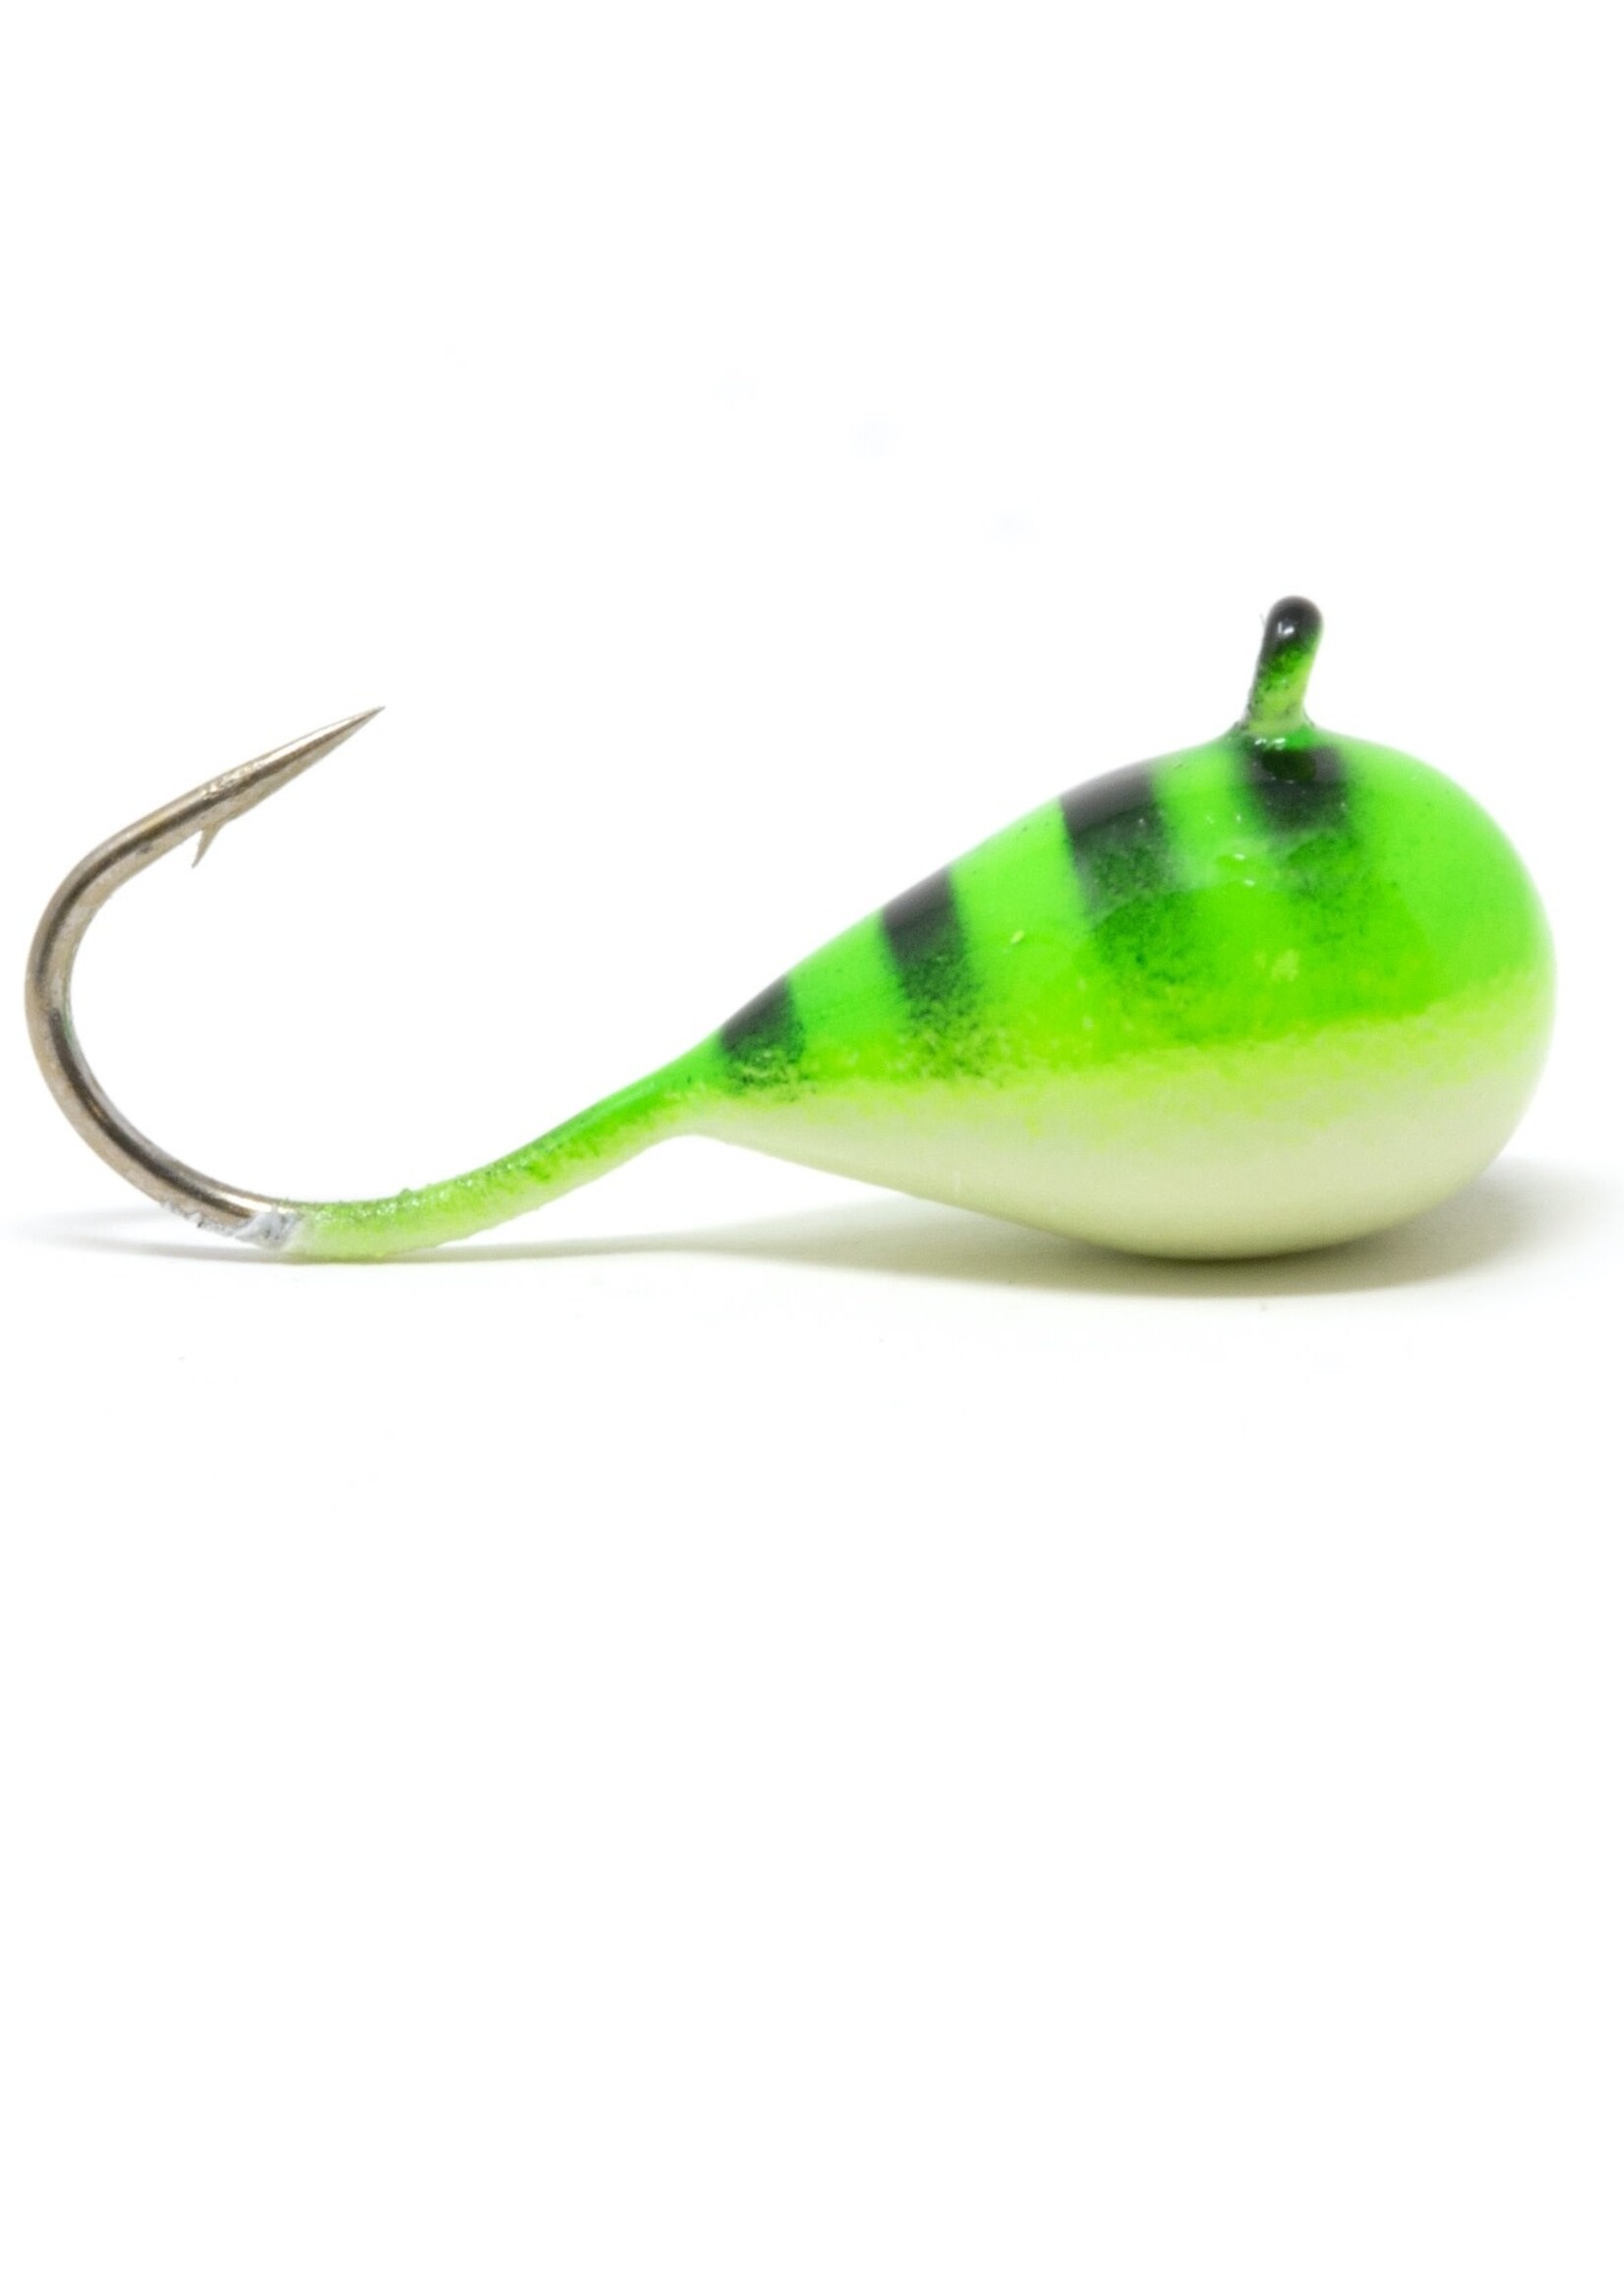 Clam The Drop Tungsten Jig - Tackle Shack